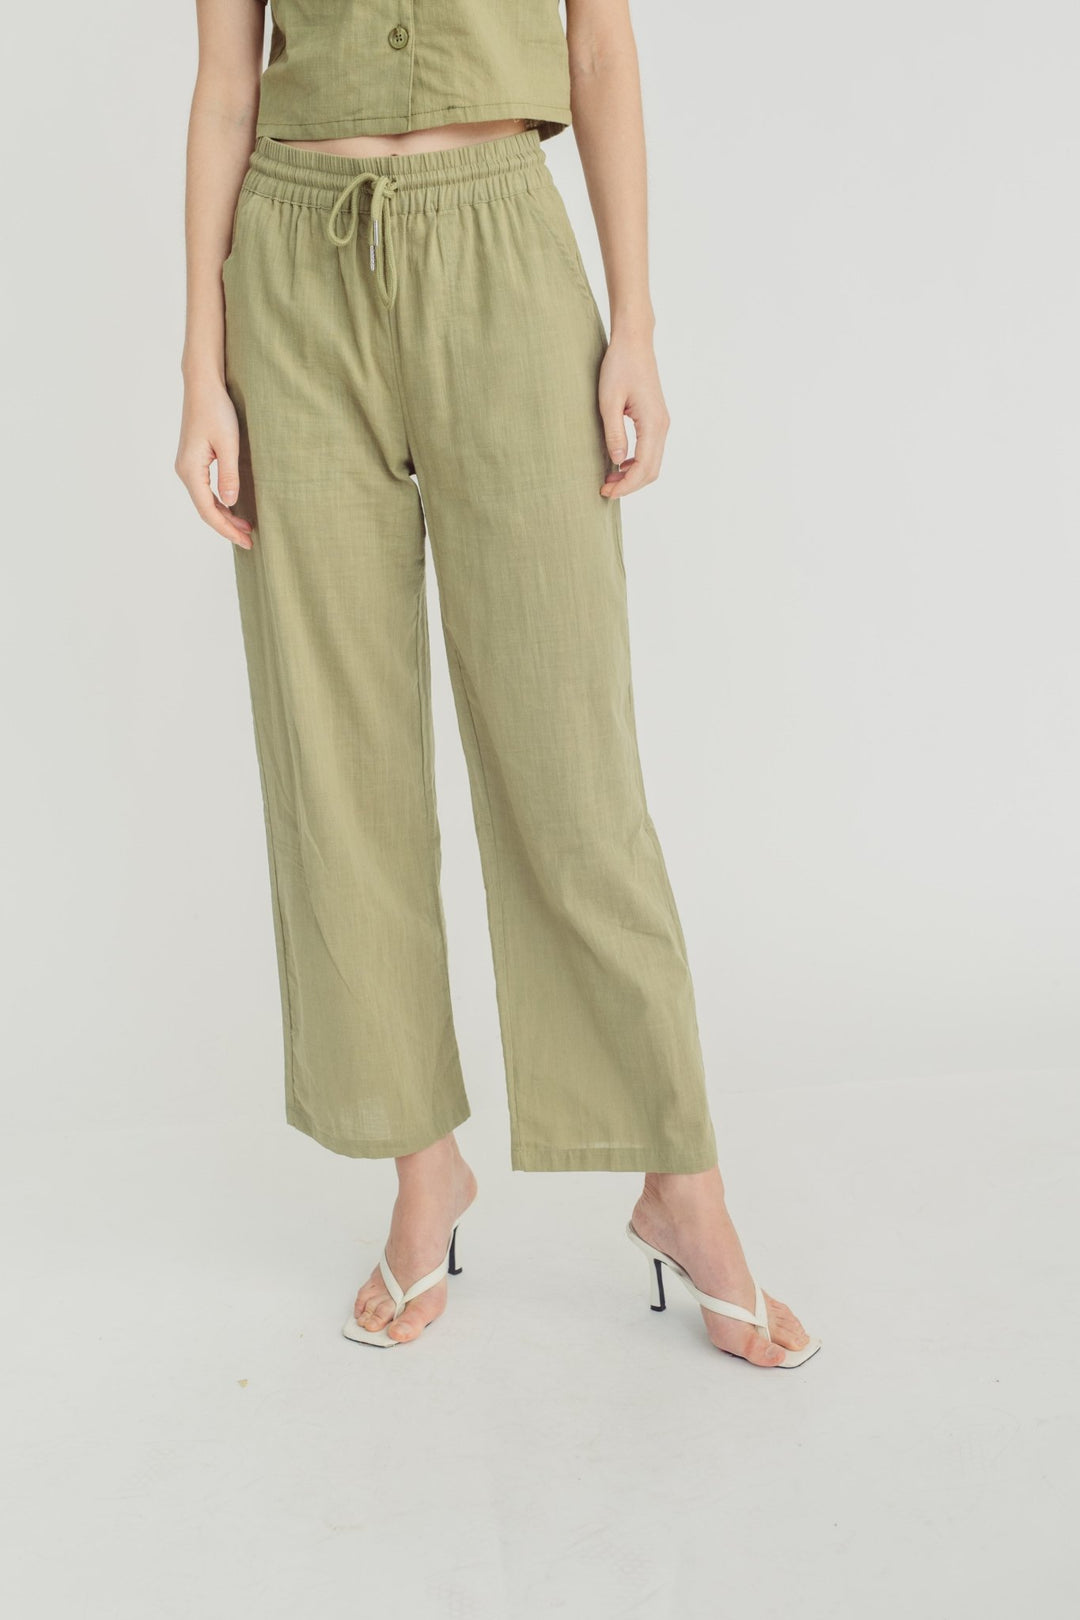 Tailored Fit Pocket Cargo Pants - Mossimo PH